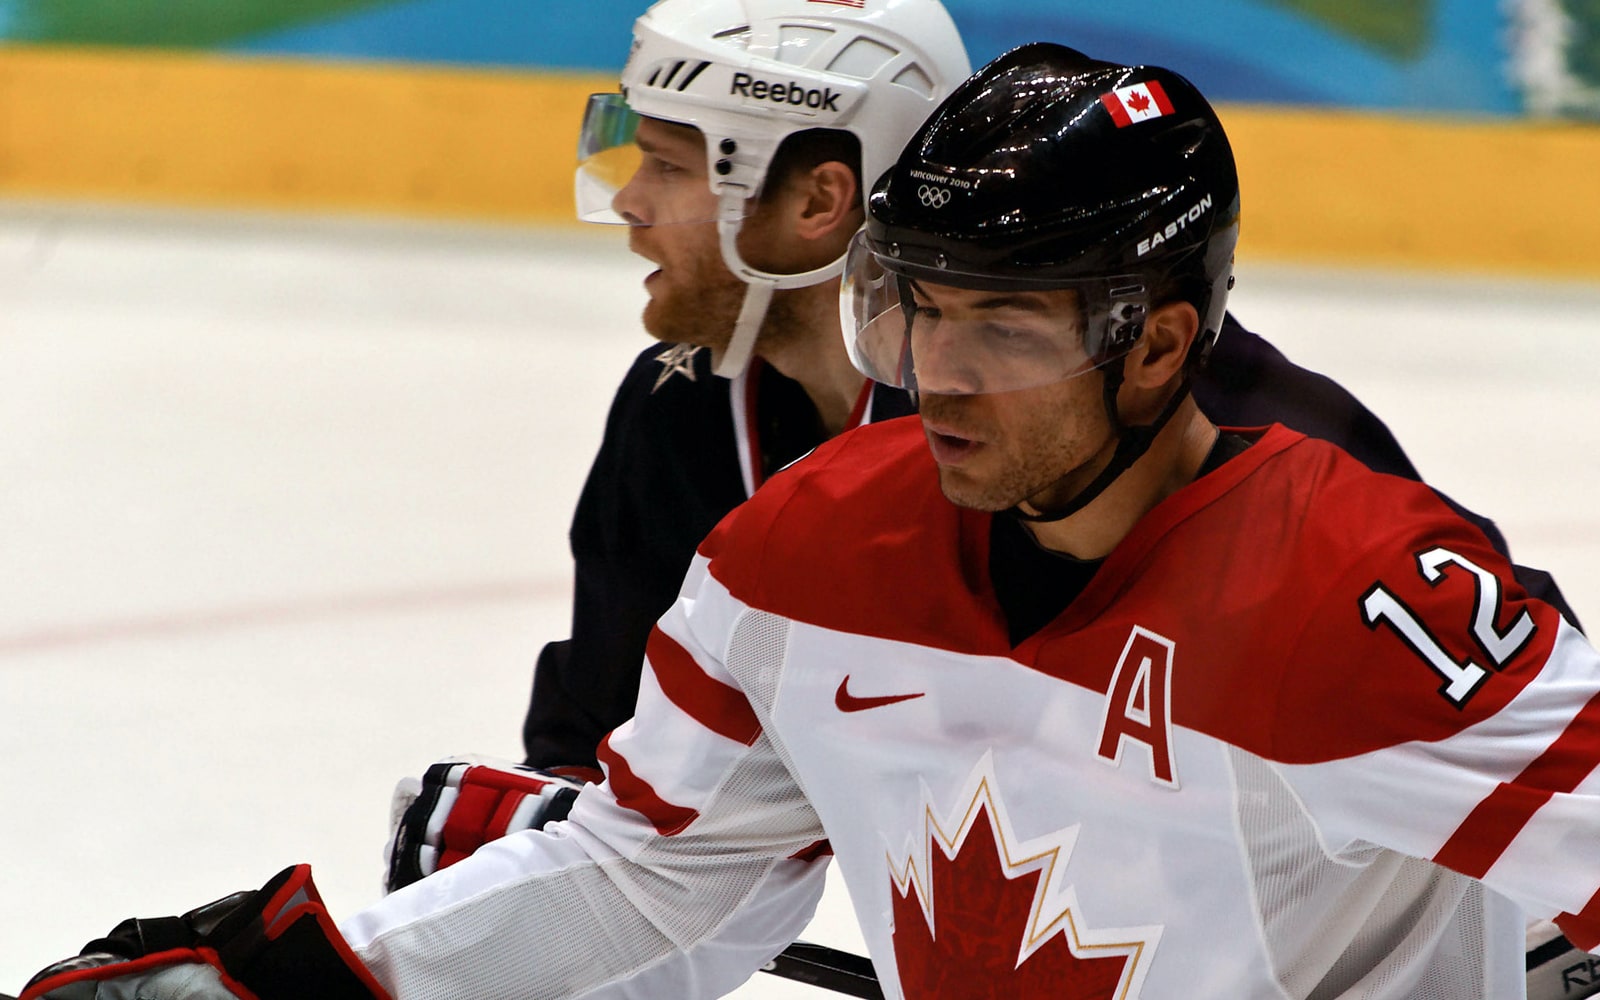 Jerome Iginla in a Team Canada hockey uniform during the 2010 winter olympics